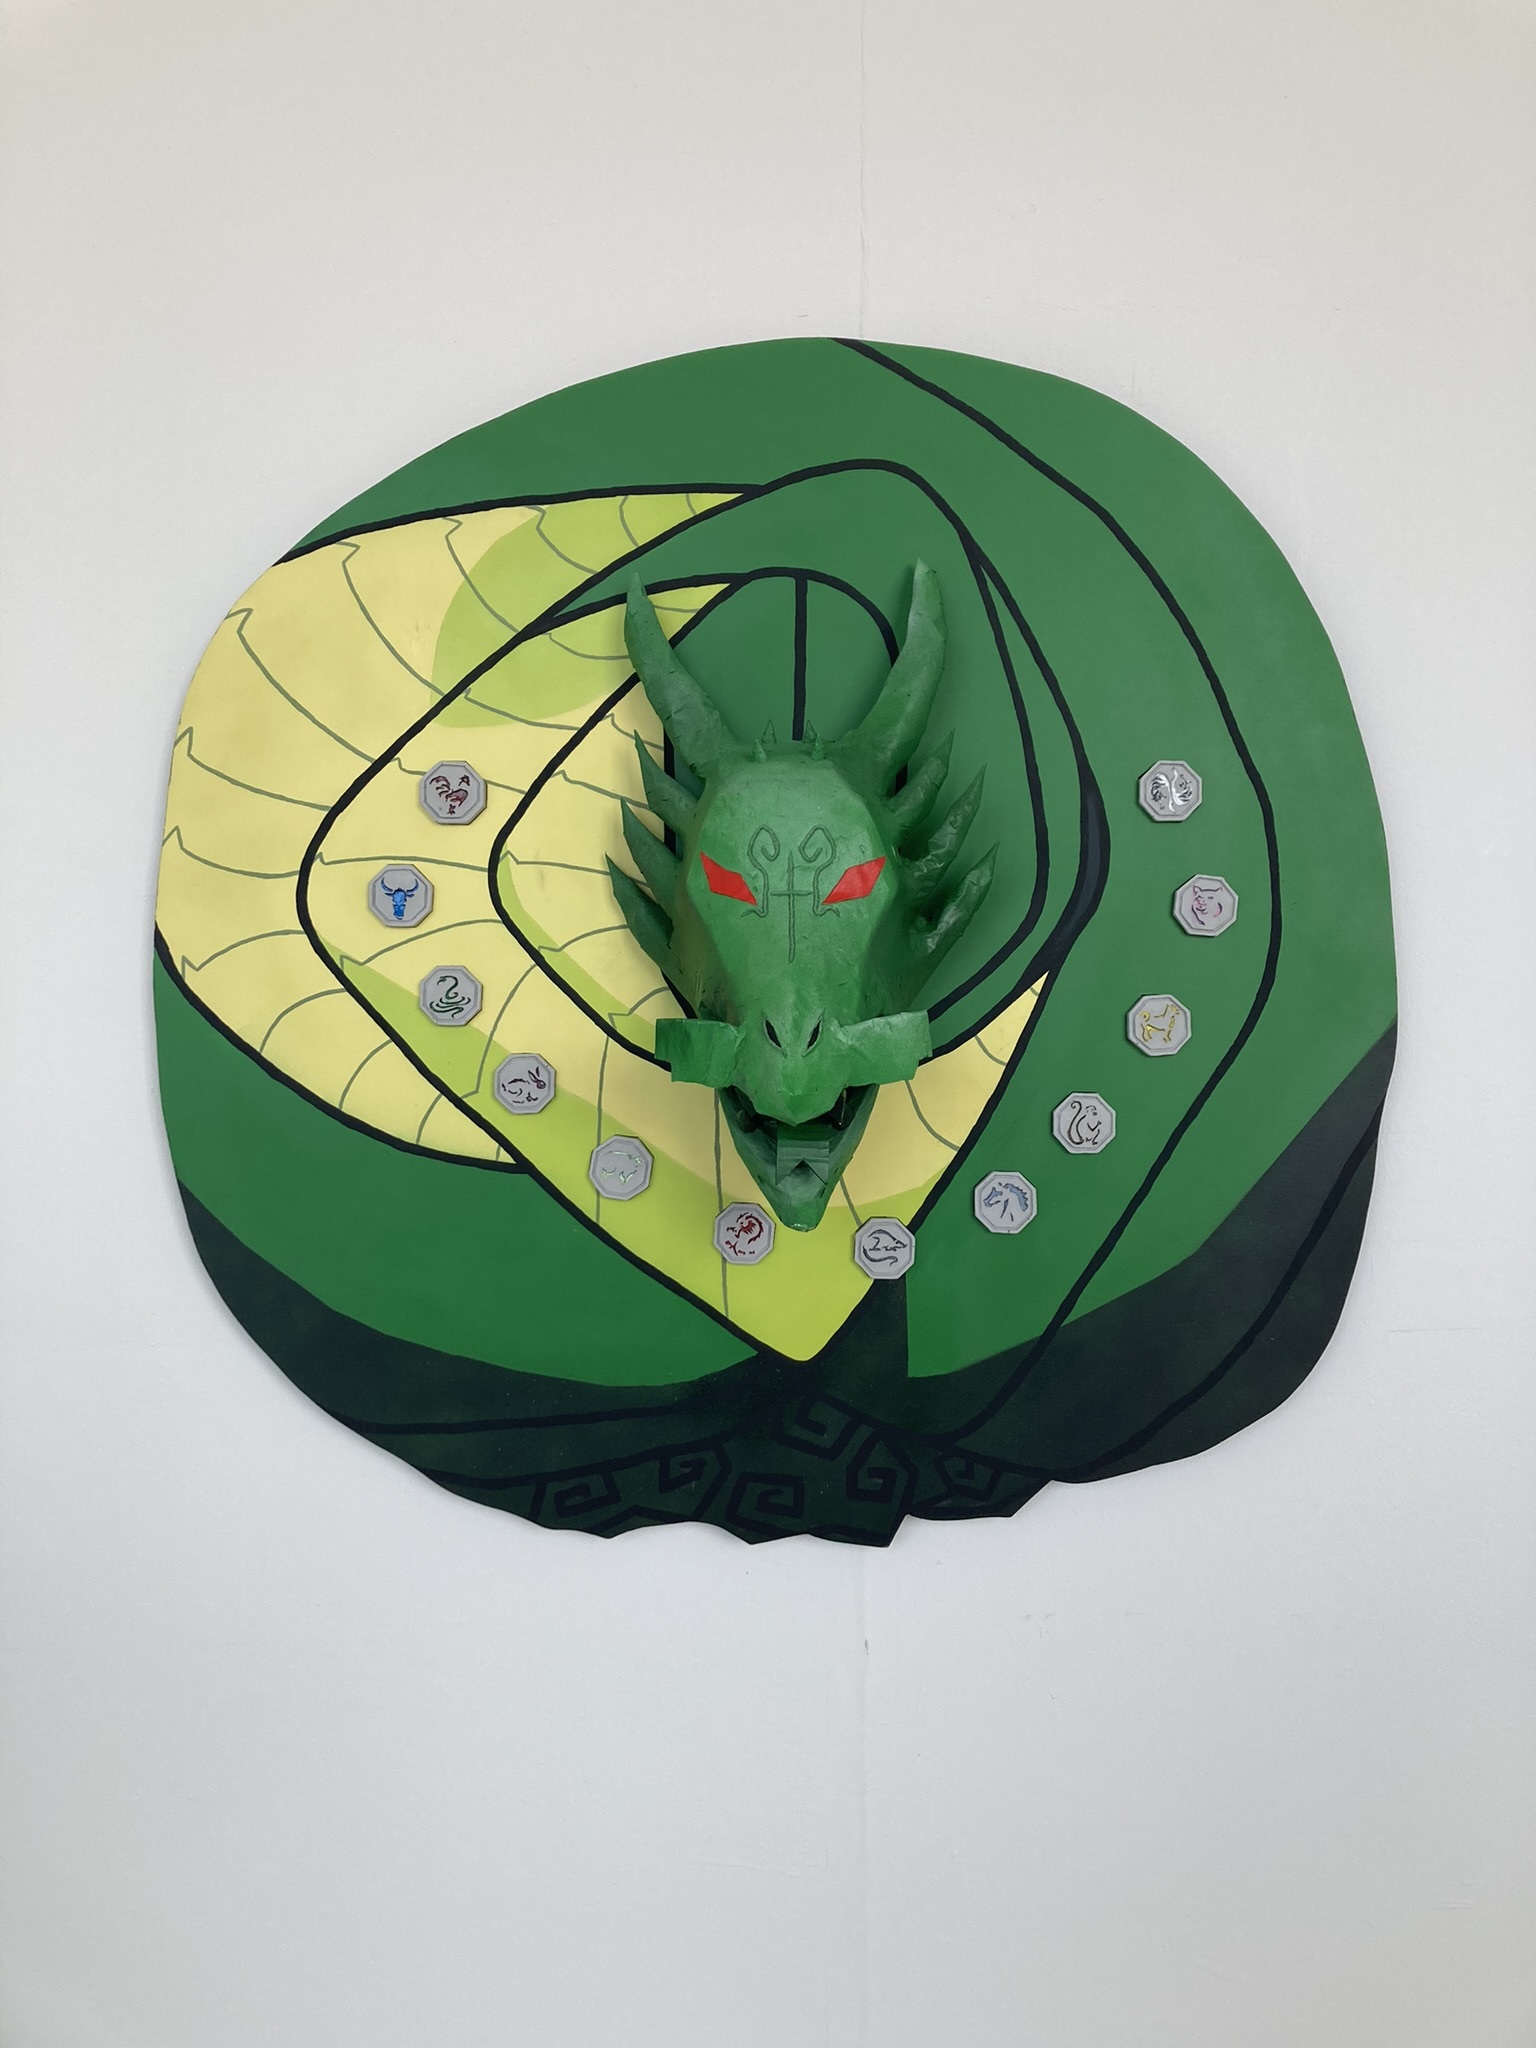 Fine Art work by Joy Suddery showing a coiled green dragon sculpture with twelve octagonal objects inserted into the body of the dragon.